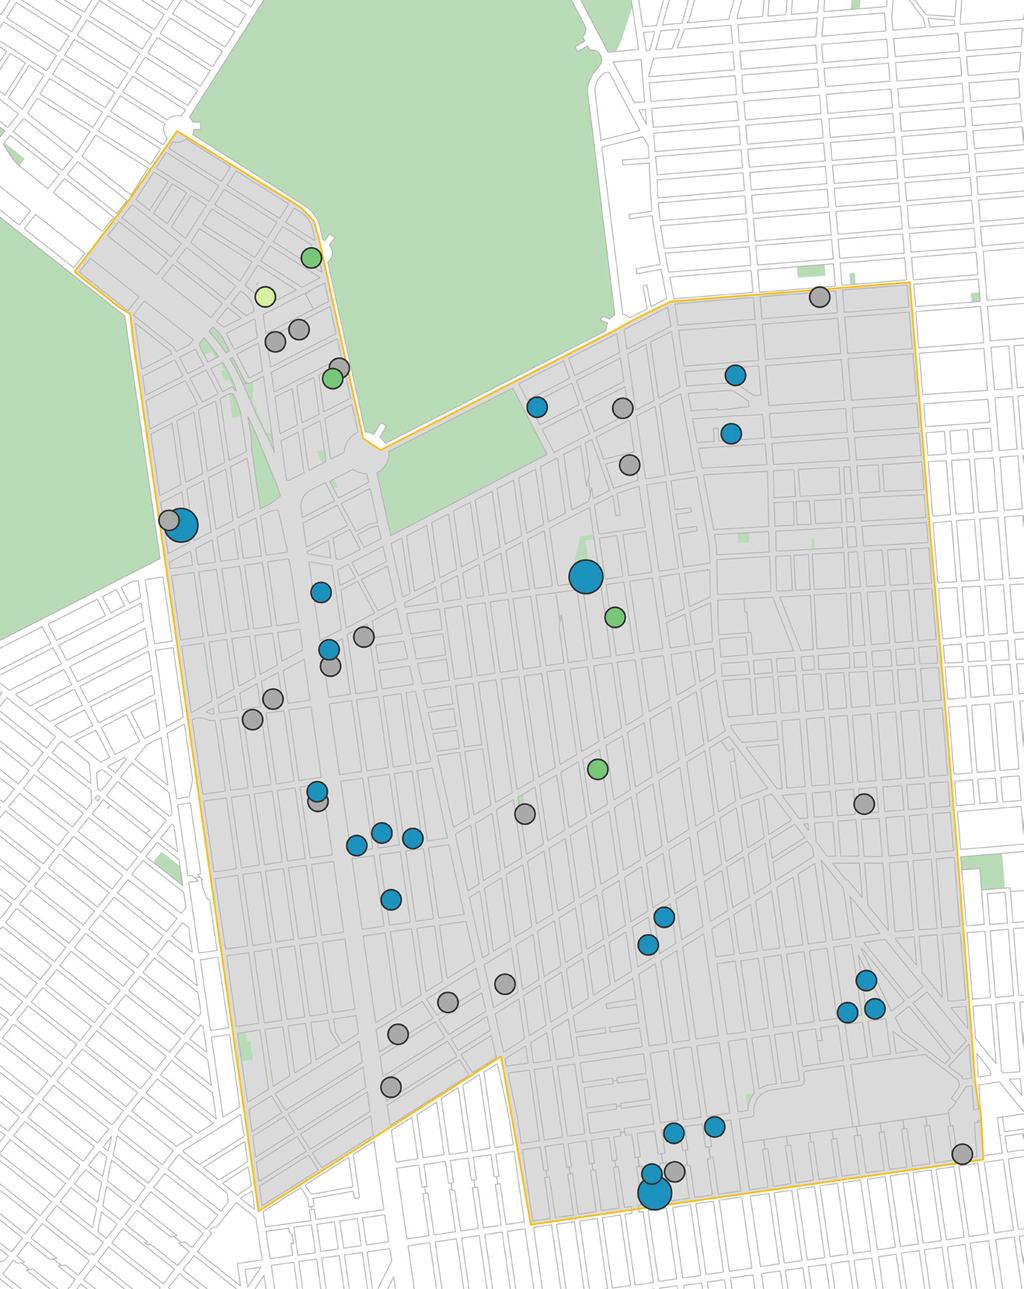 Page 14 Kensington - Windsor Terrace - Ditmas Park - Flatbush - Prospect Park South Unlike other submarkets, median and average price in the condo market were down both year-over-year and